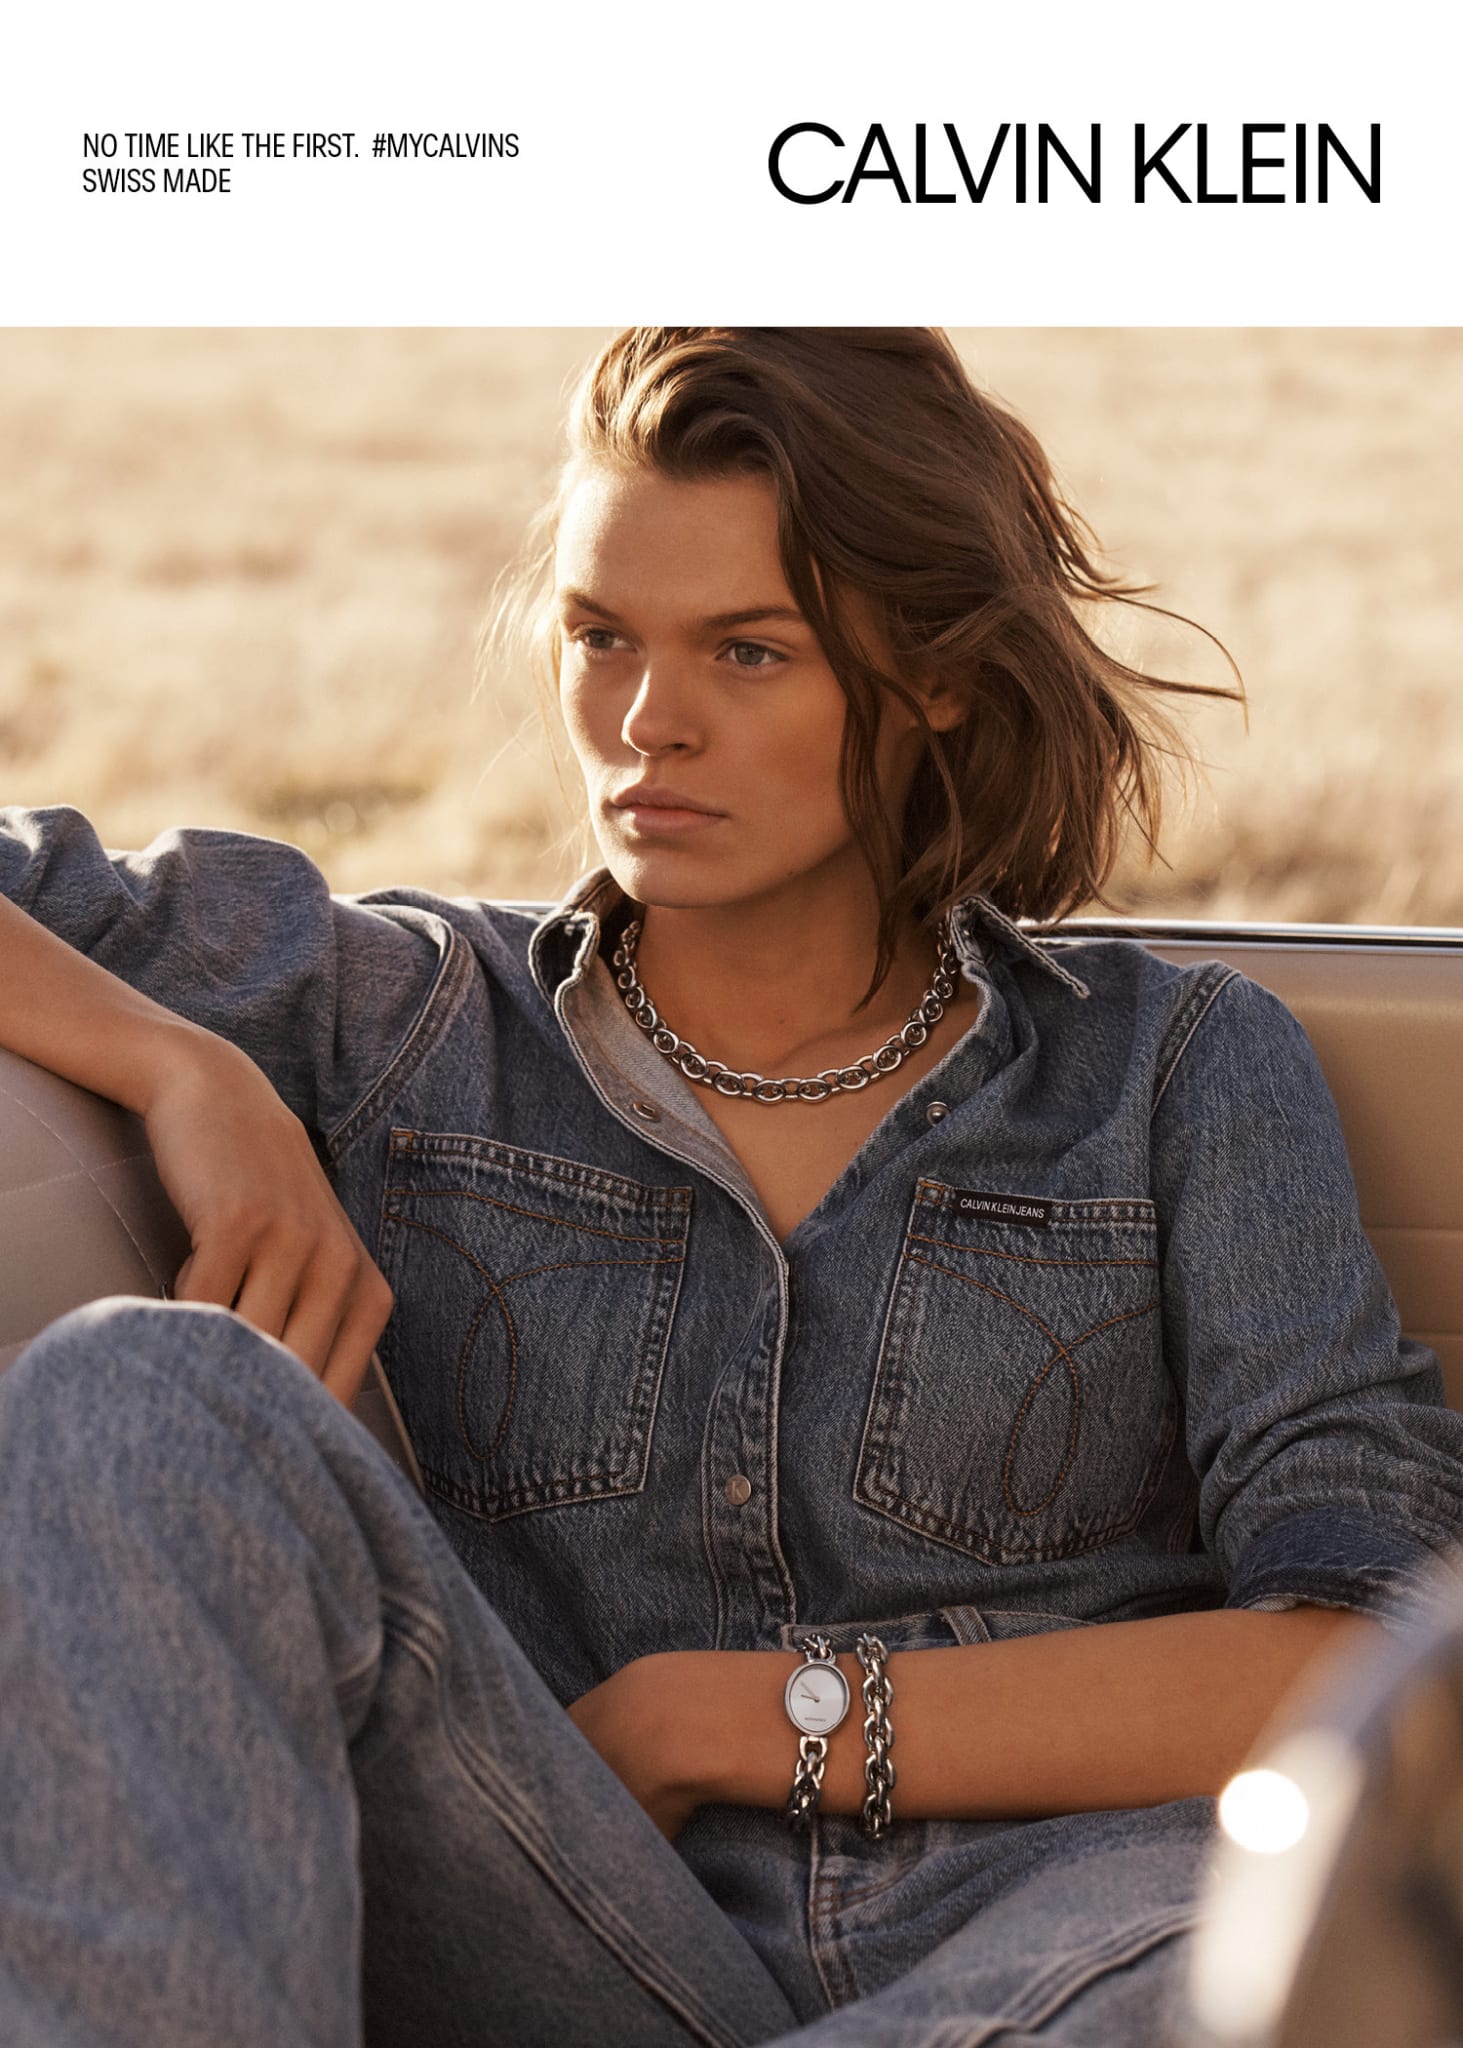 Calvin Klein Launches 2019 Global Ad Campaign For Watches And Jewellery